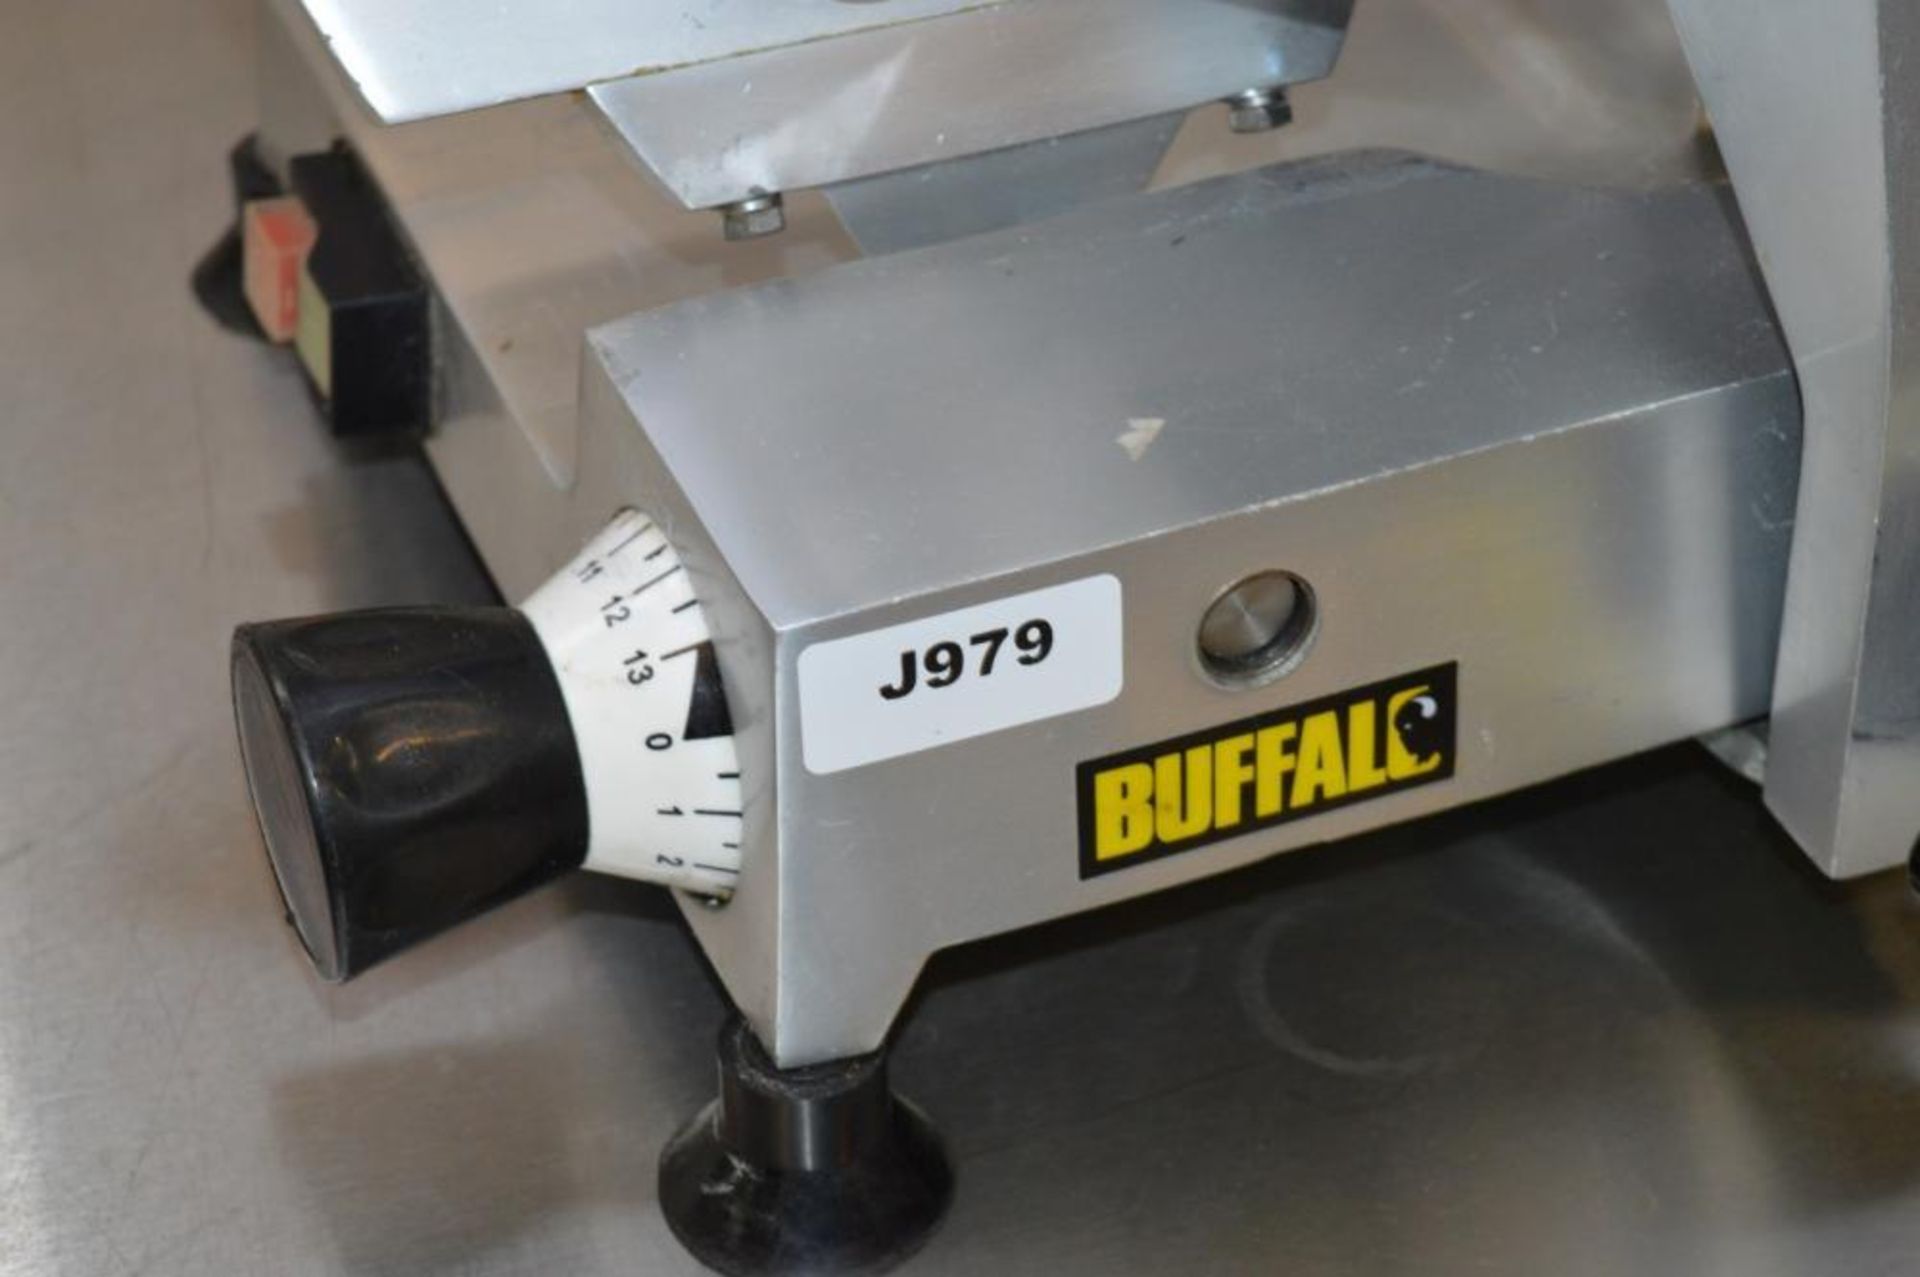 1 x Buffalo CD278 Stainless Steel Commercial 10 Inch Meat Slicer - 240V 120W - H40 x W47 x D40 cms - - Image 6 of 10